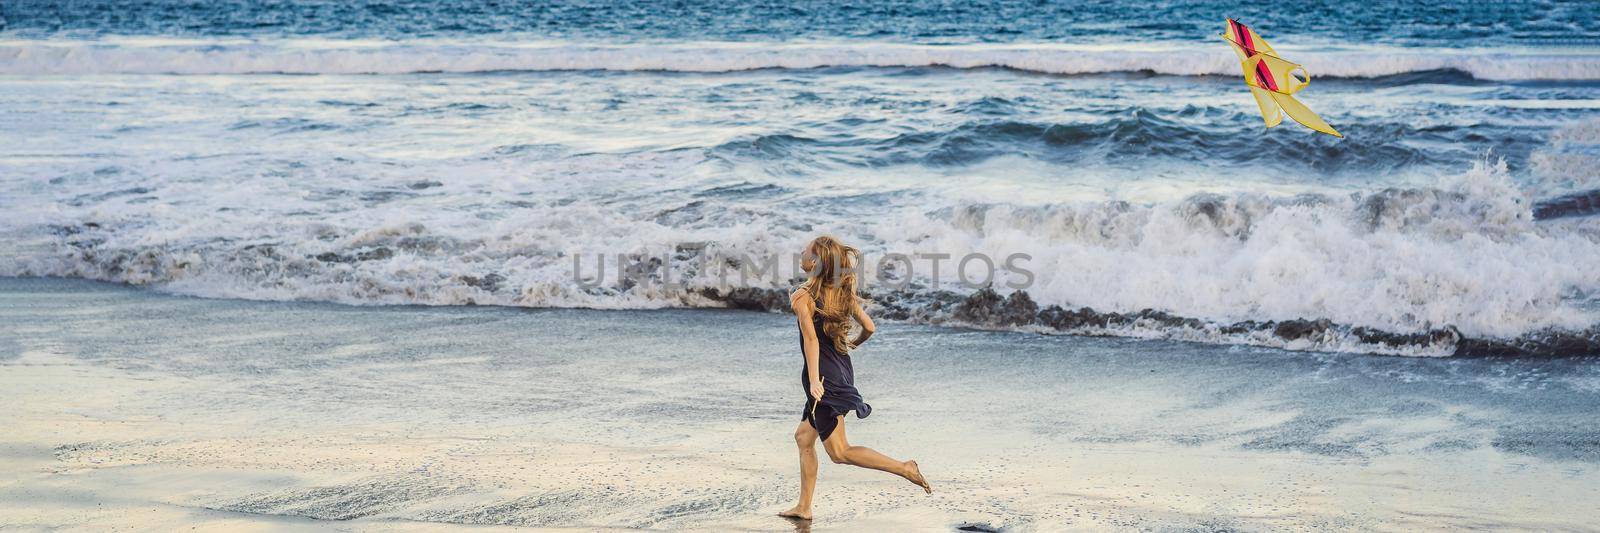 A young woman launches a kite on the beach. Dream, aspirations, future plans. BANNER, LONG FORMAT